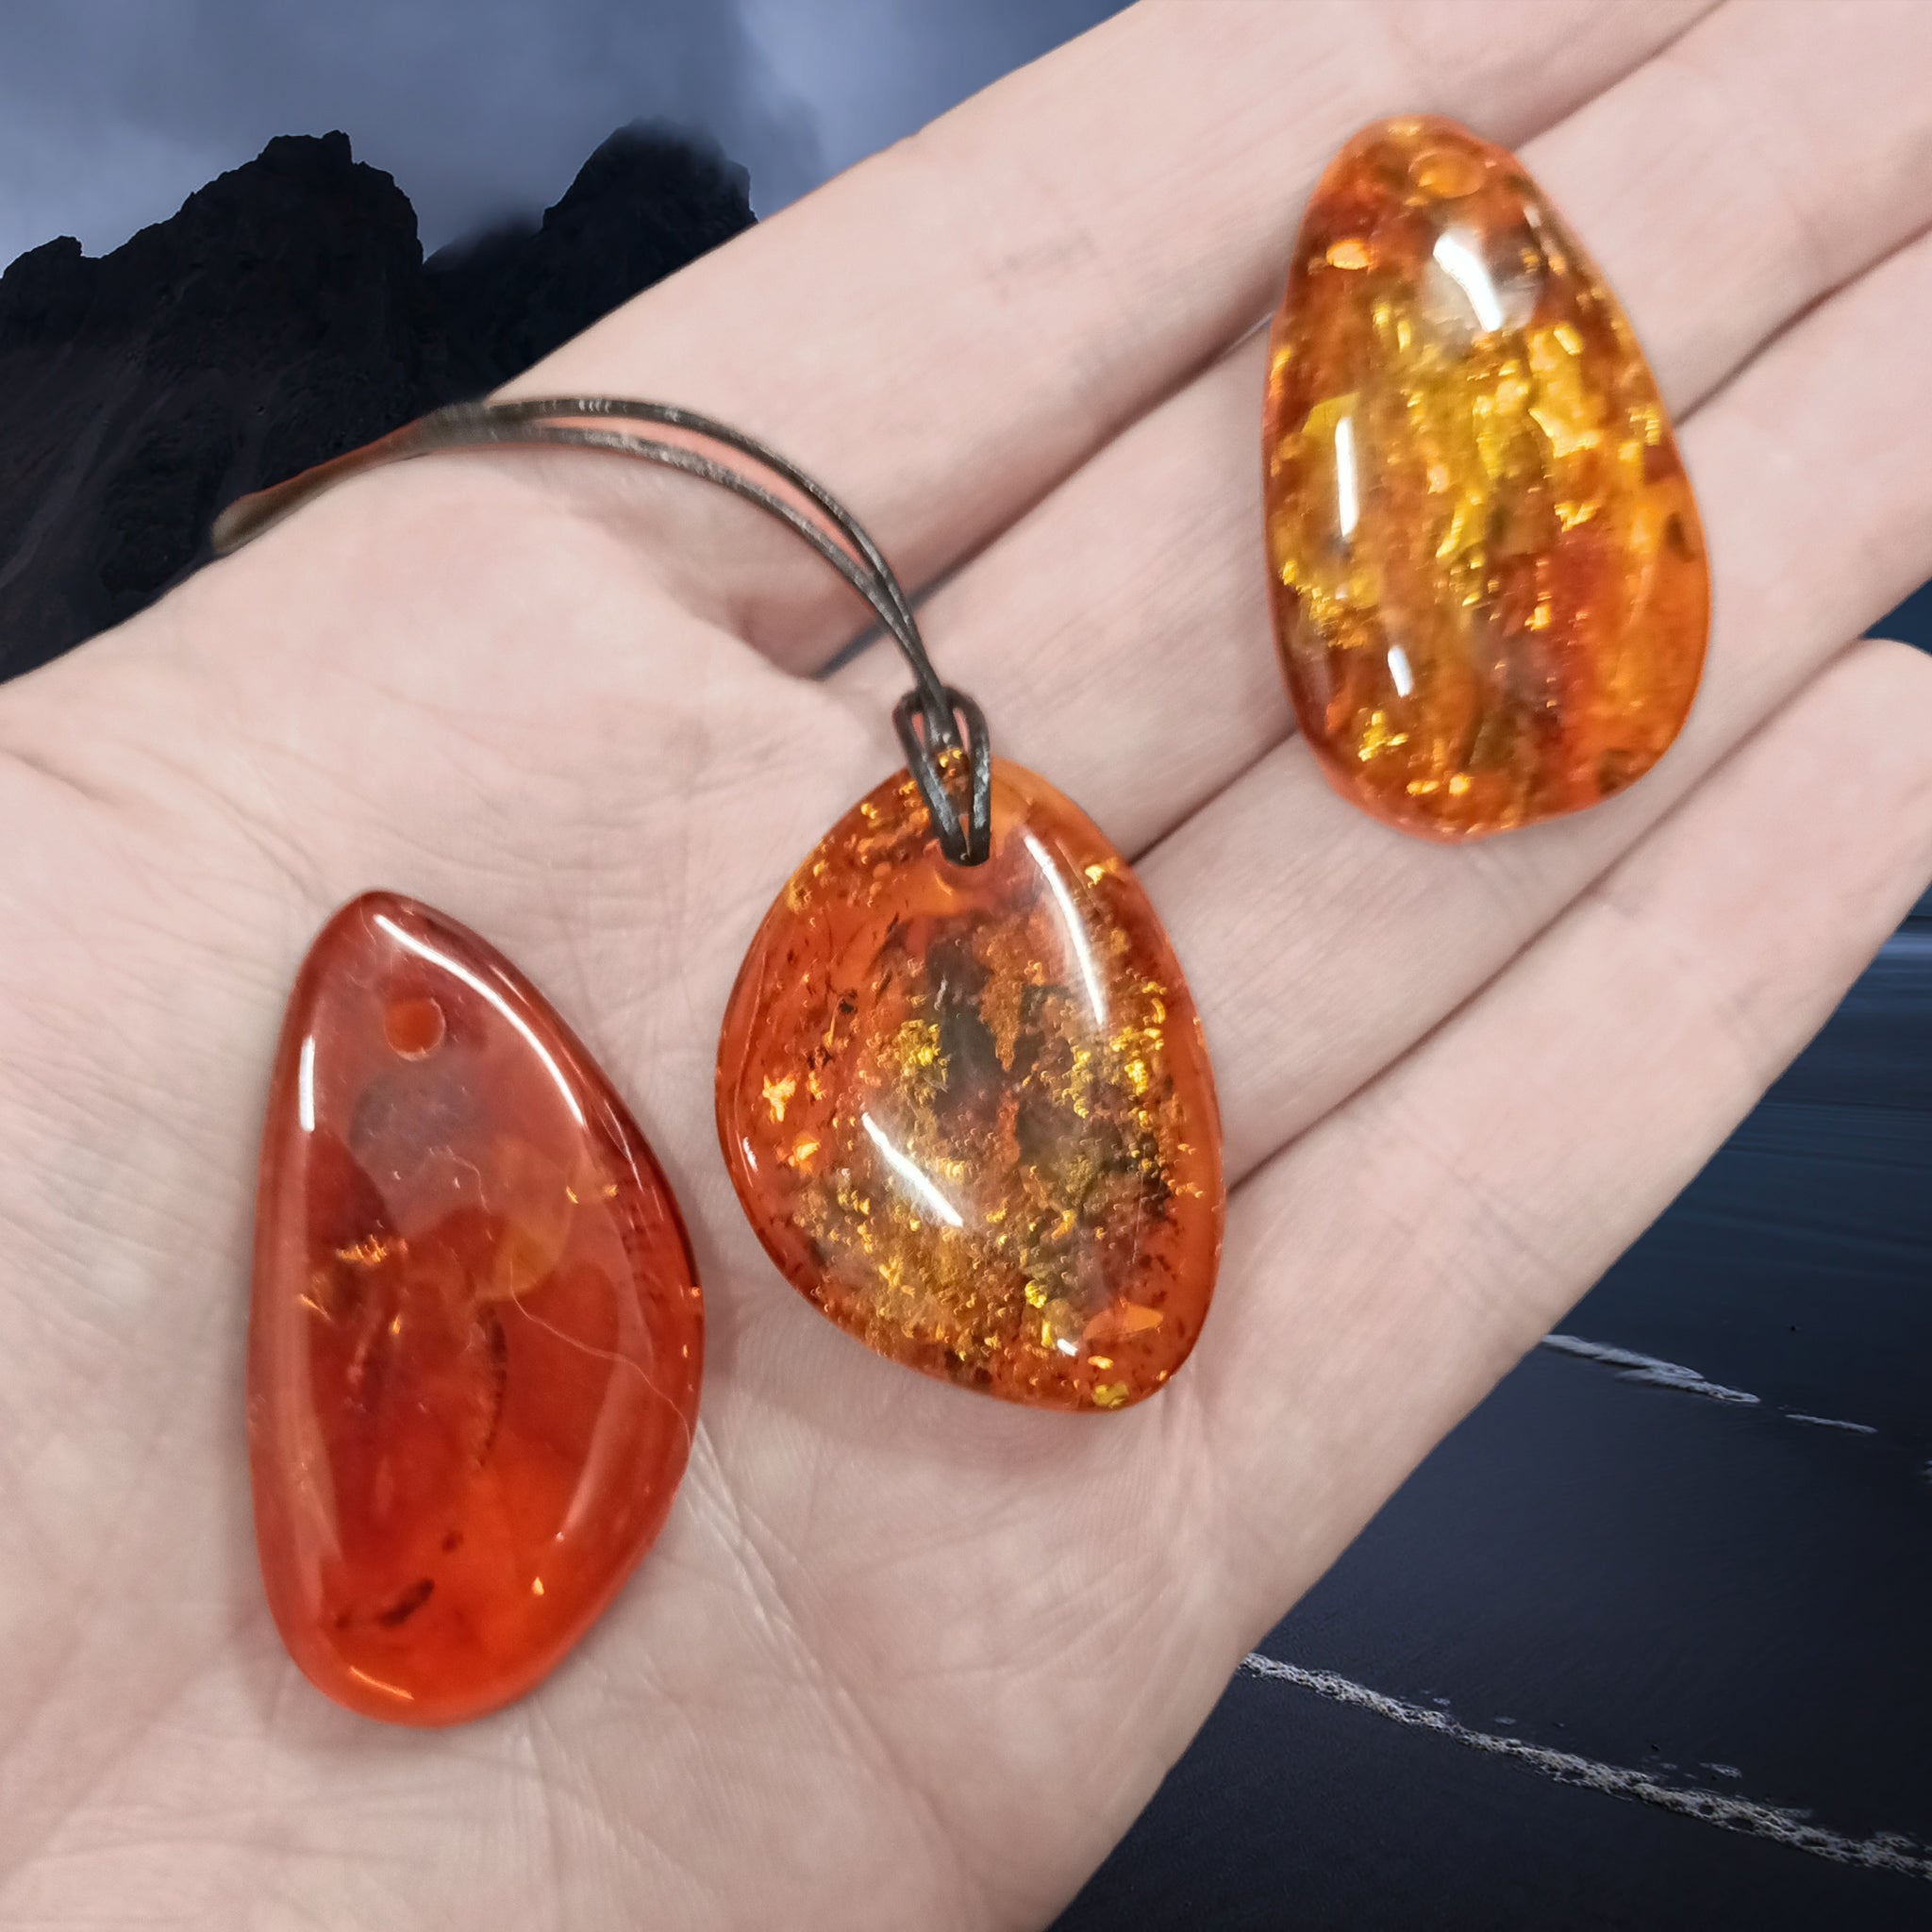 Gorgeous Baltic Amber Pendant Made of Genuine Amber.